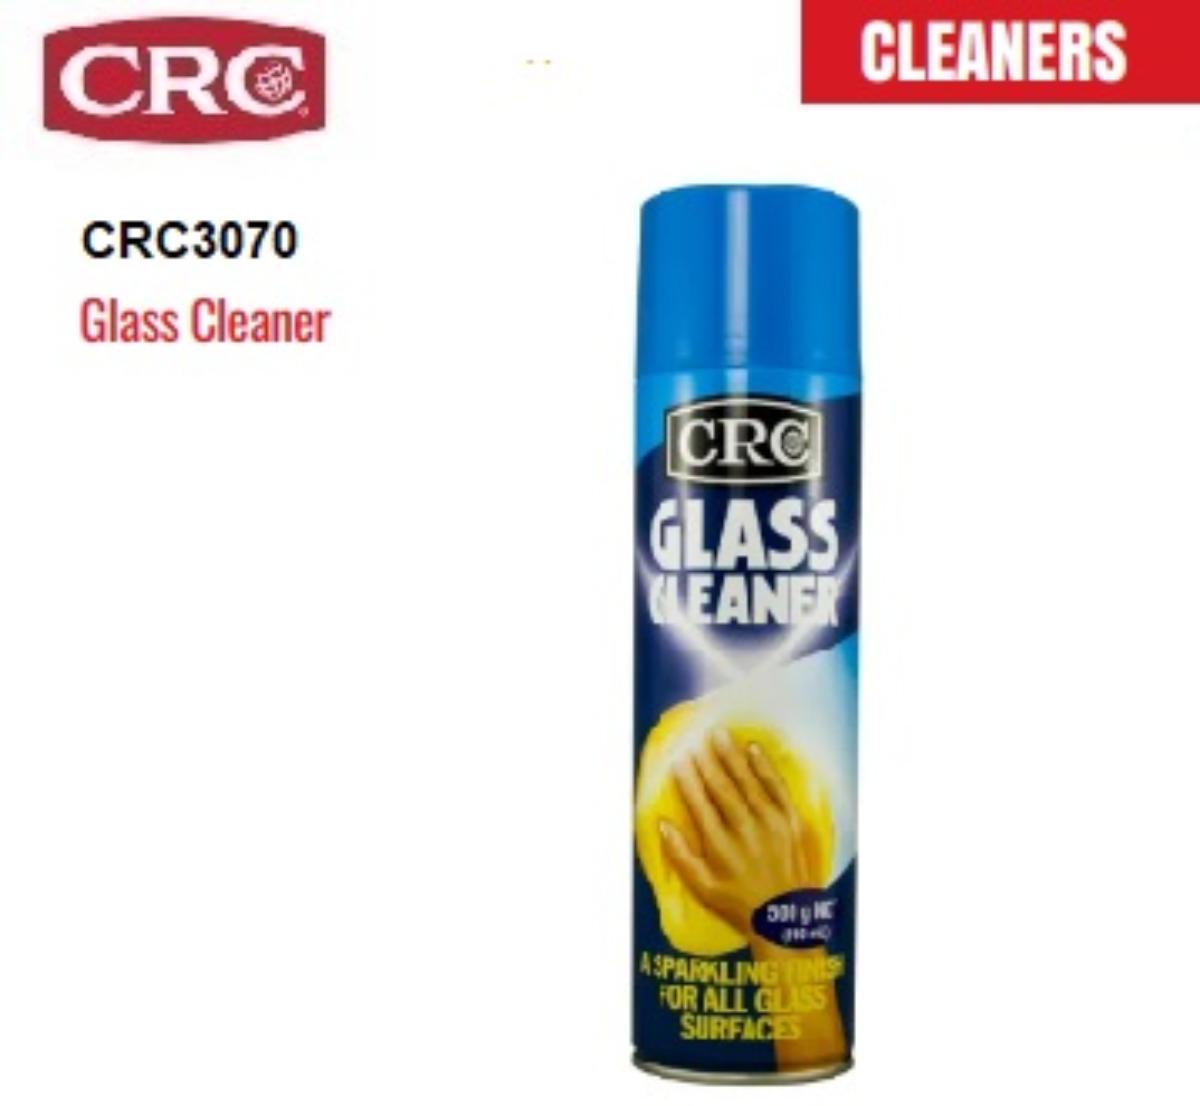 CRC GLASS CLEANER 500g